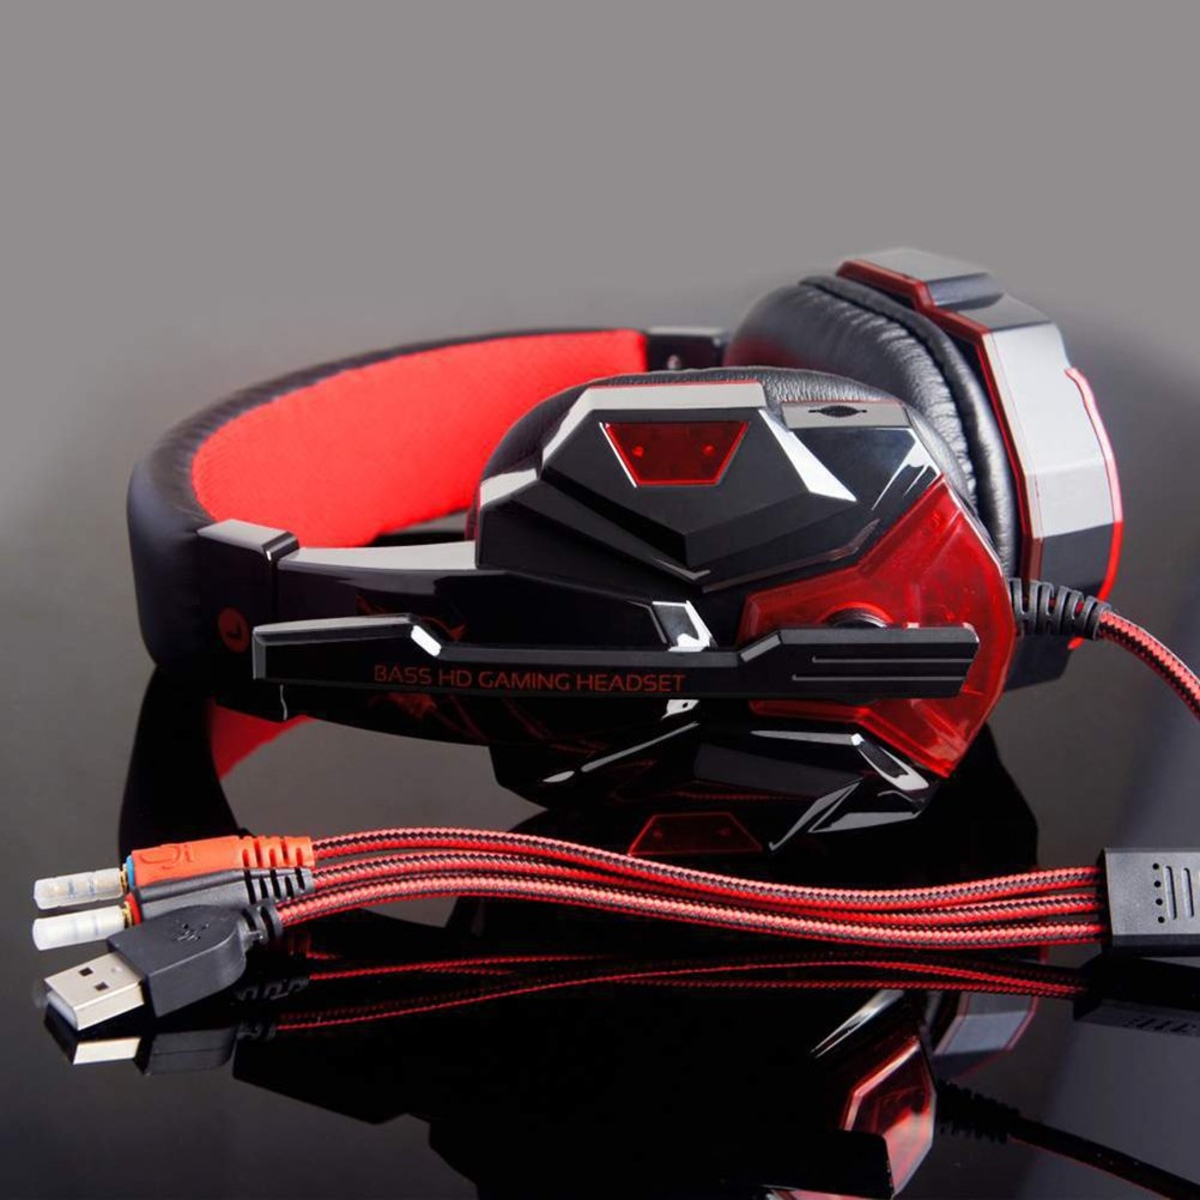 How To Plug In And Set Up A PT780 Bass HD Gaming Headset